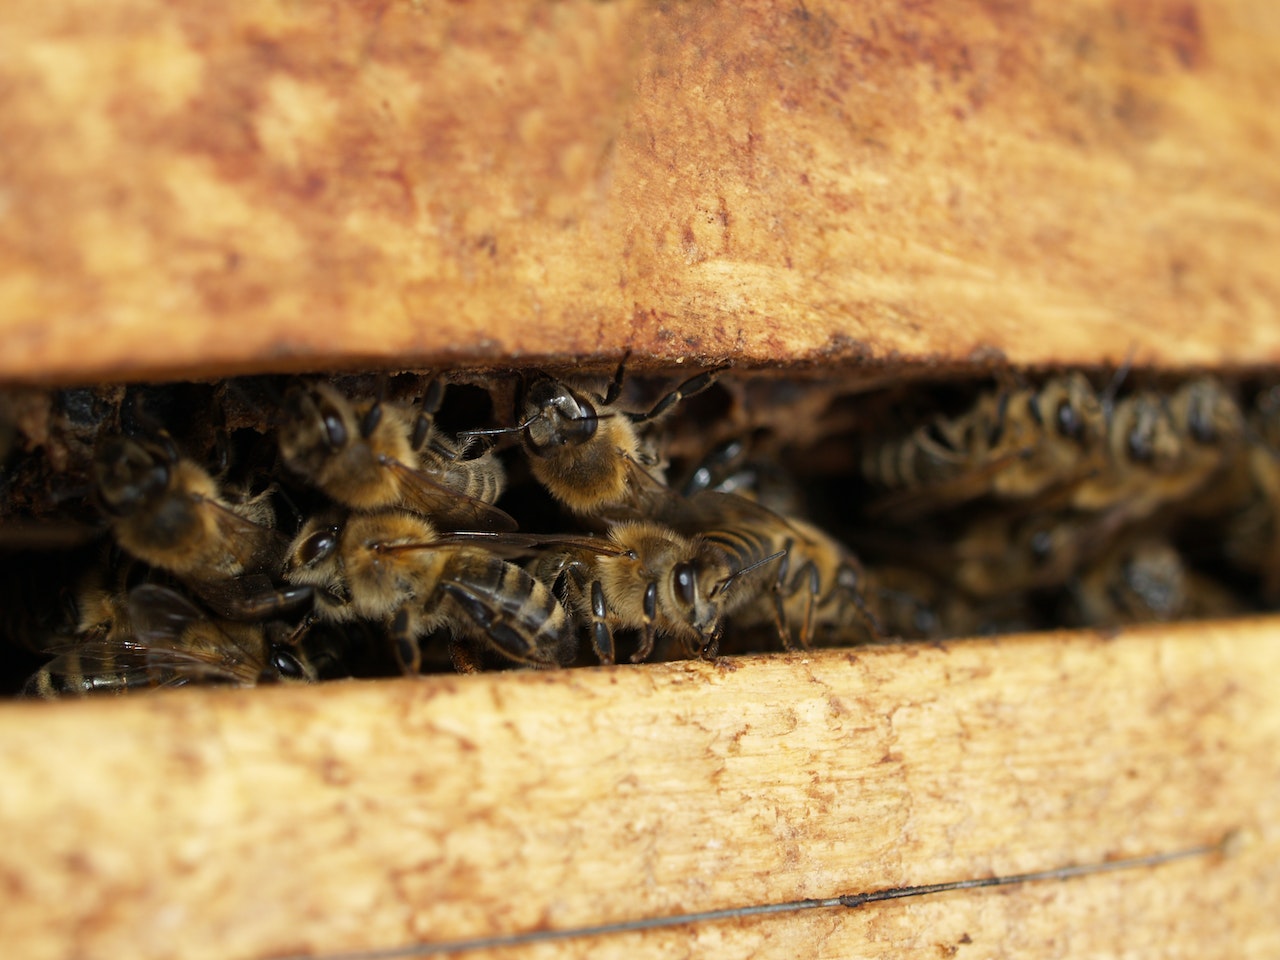 Bees within a hive.